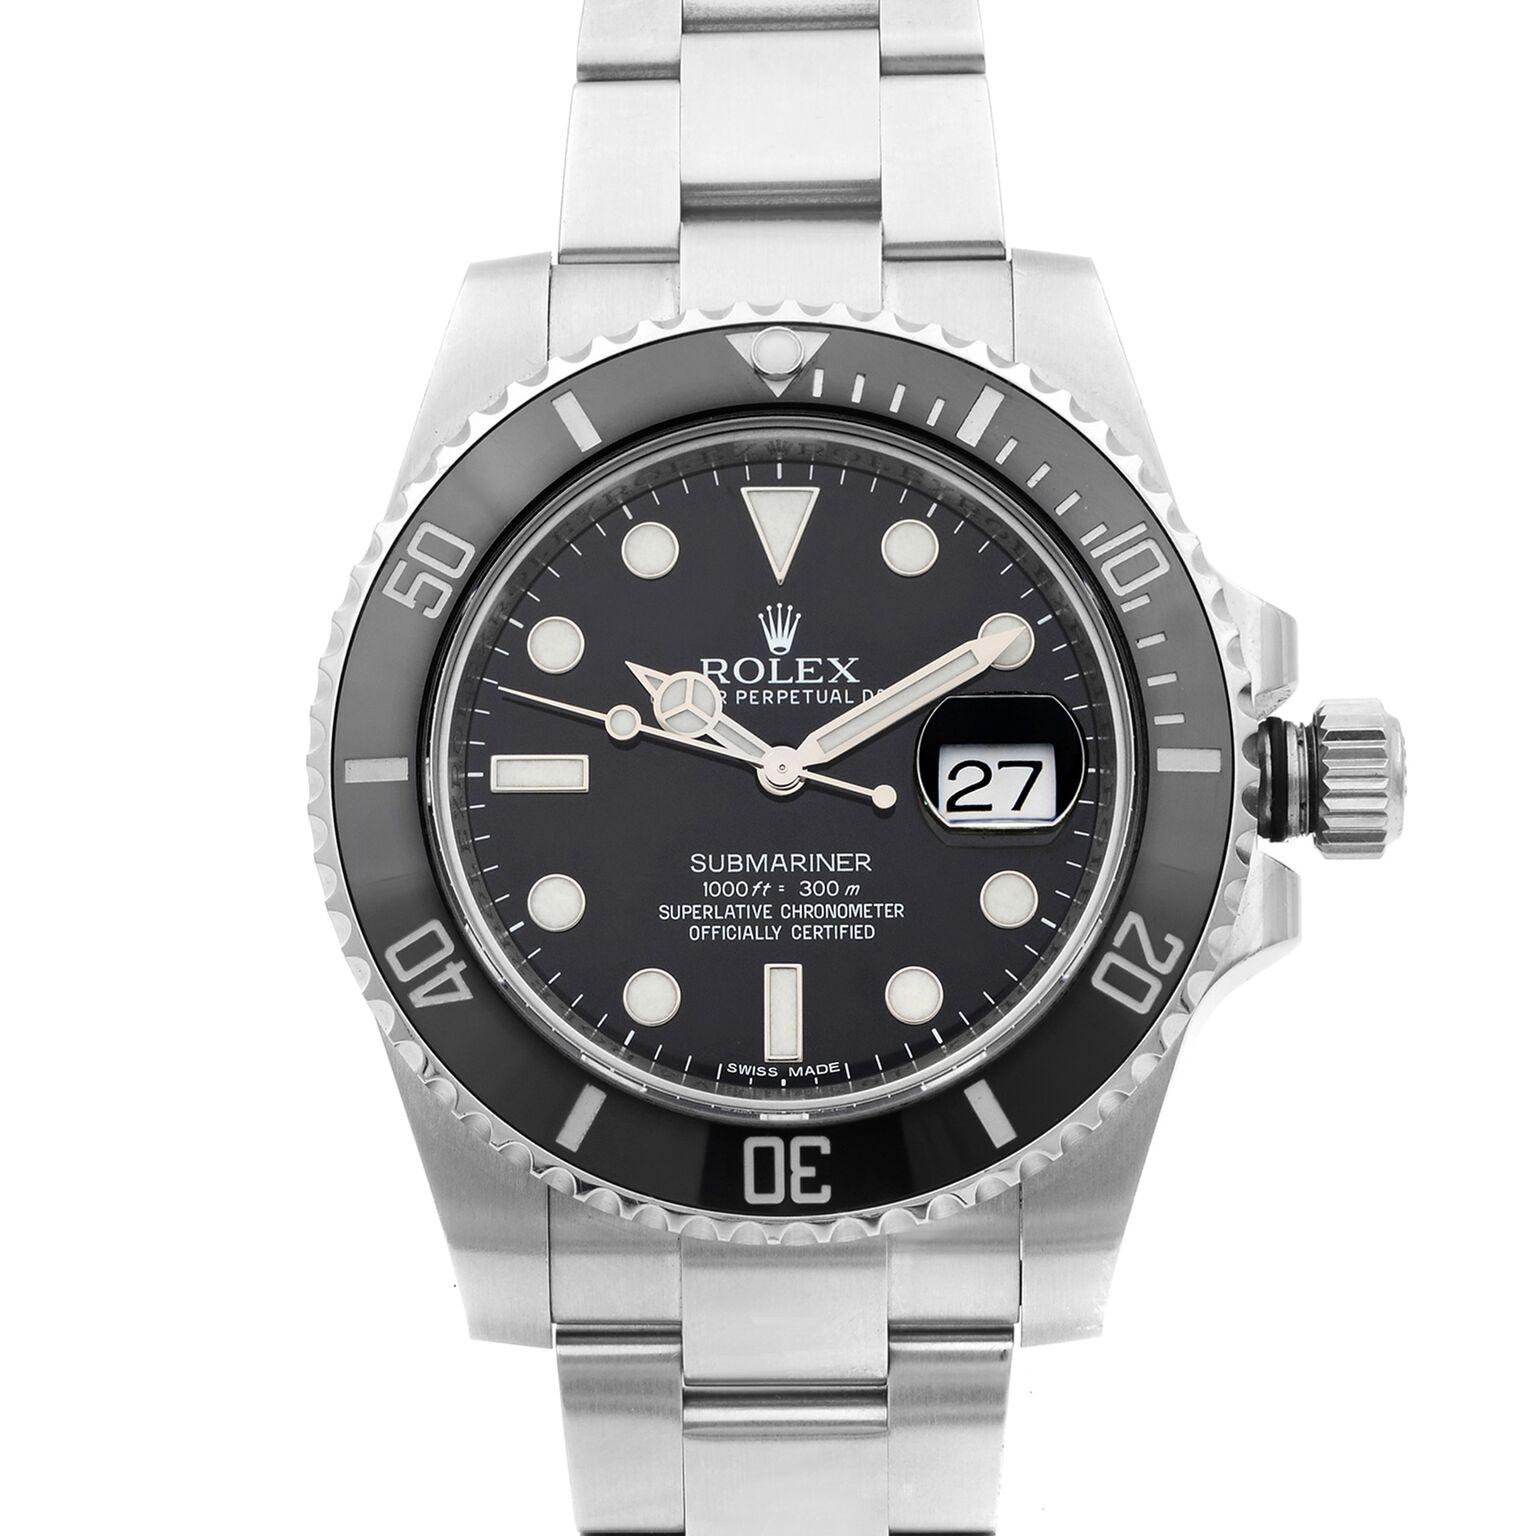 This pre-owned Rolex Submariner 116610LN is a beautiful men's timepiece that is powered by a mechanical (automatic) movement which is cased in a stainless steel case. It has a round shape face, date indicator dial, and has hand sticks & dots style